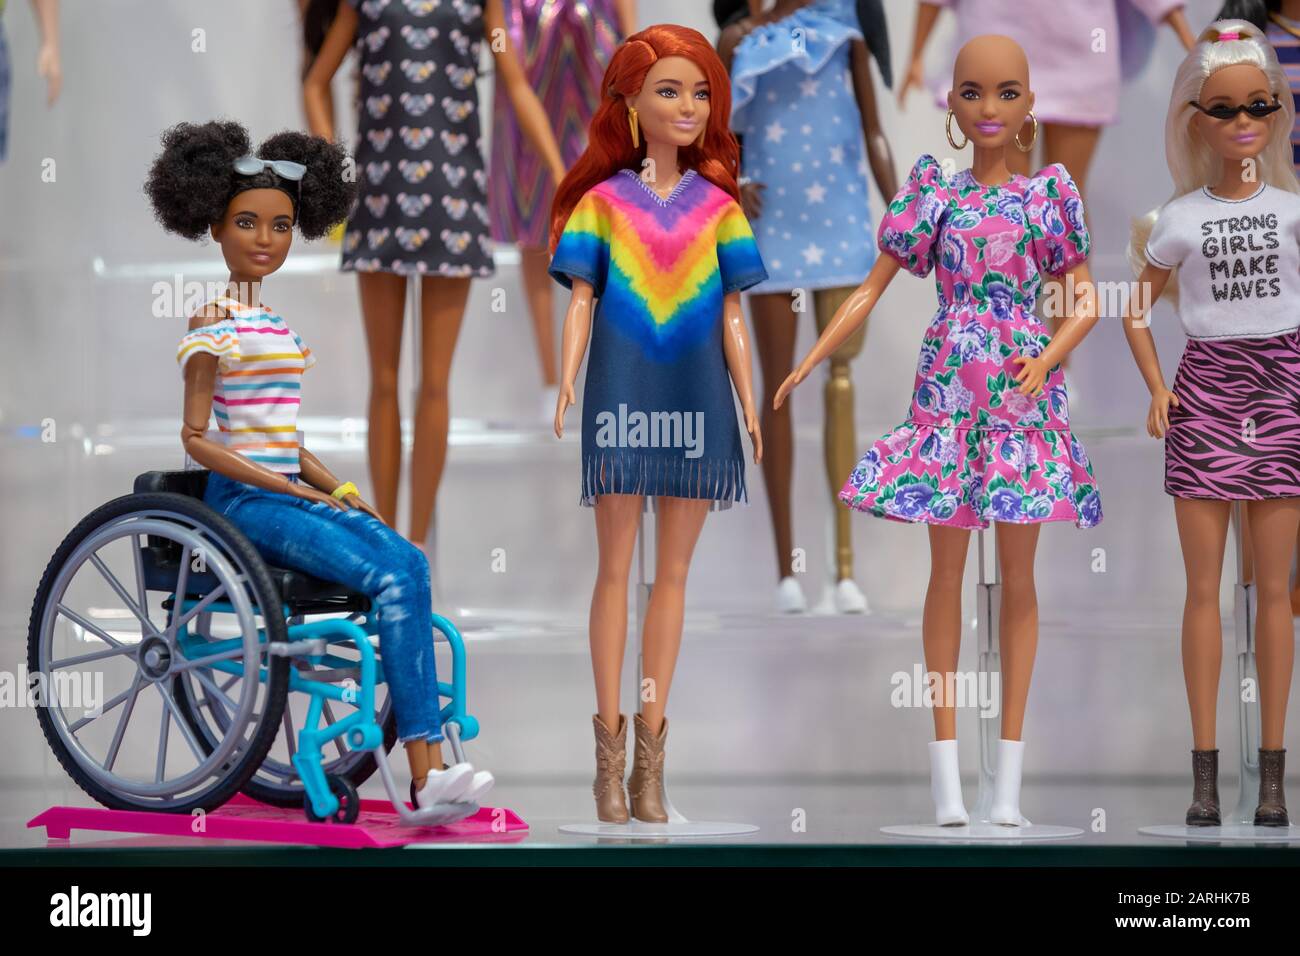 Høflig Perfekt madras Nuremberg, Germany. 28th Jan, 2020. Barbie dolls from the Fashionistas line  of the U.S. toy manufacturer Mattel are on display at the company's stand  at the International Toy Fair . Mattel intends